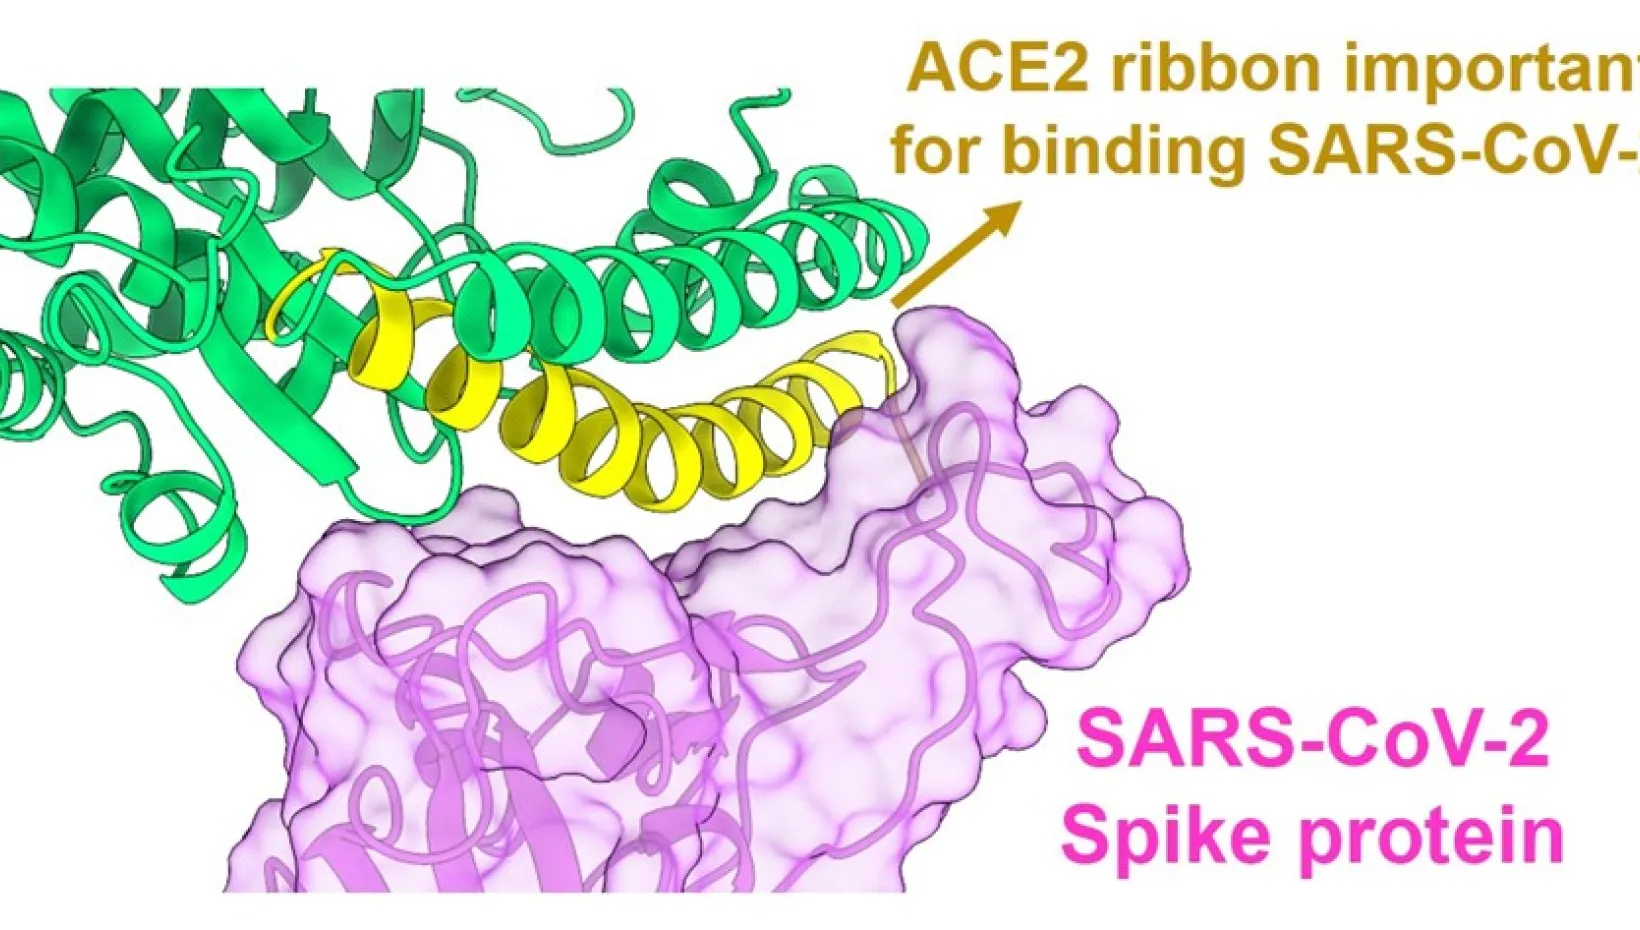 Structural interaction of SARS-CoV-2 Spike protein and ACE2 receptor. Graphic generated using ChimeraX software and published protein structure.